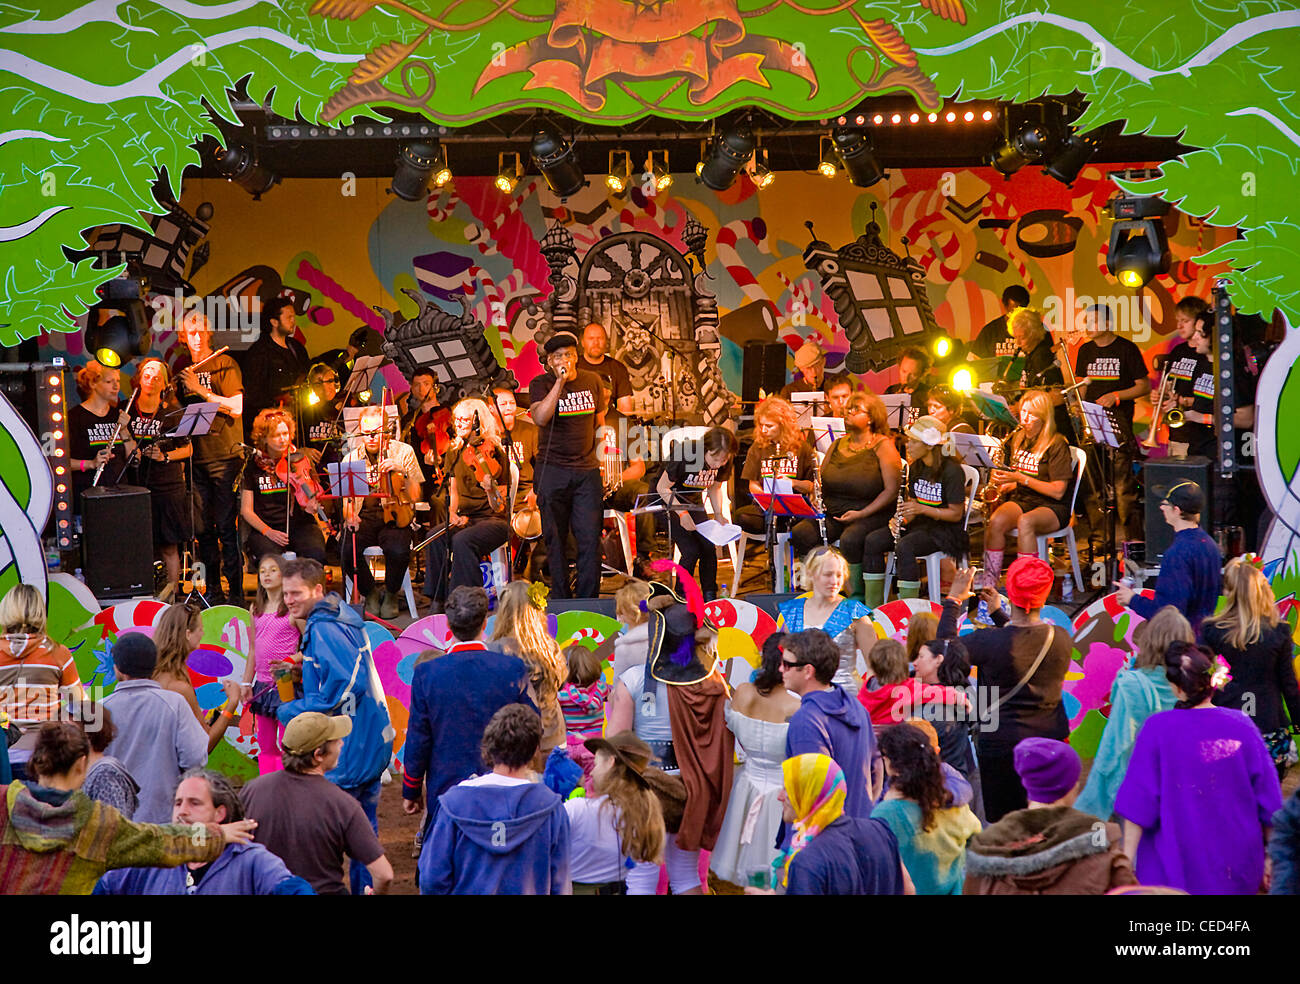 orchestra pllaying on colourful festival stage with audience dancing Stock Photo